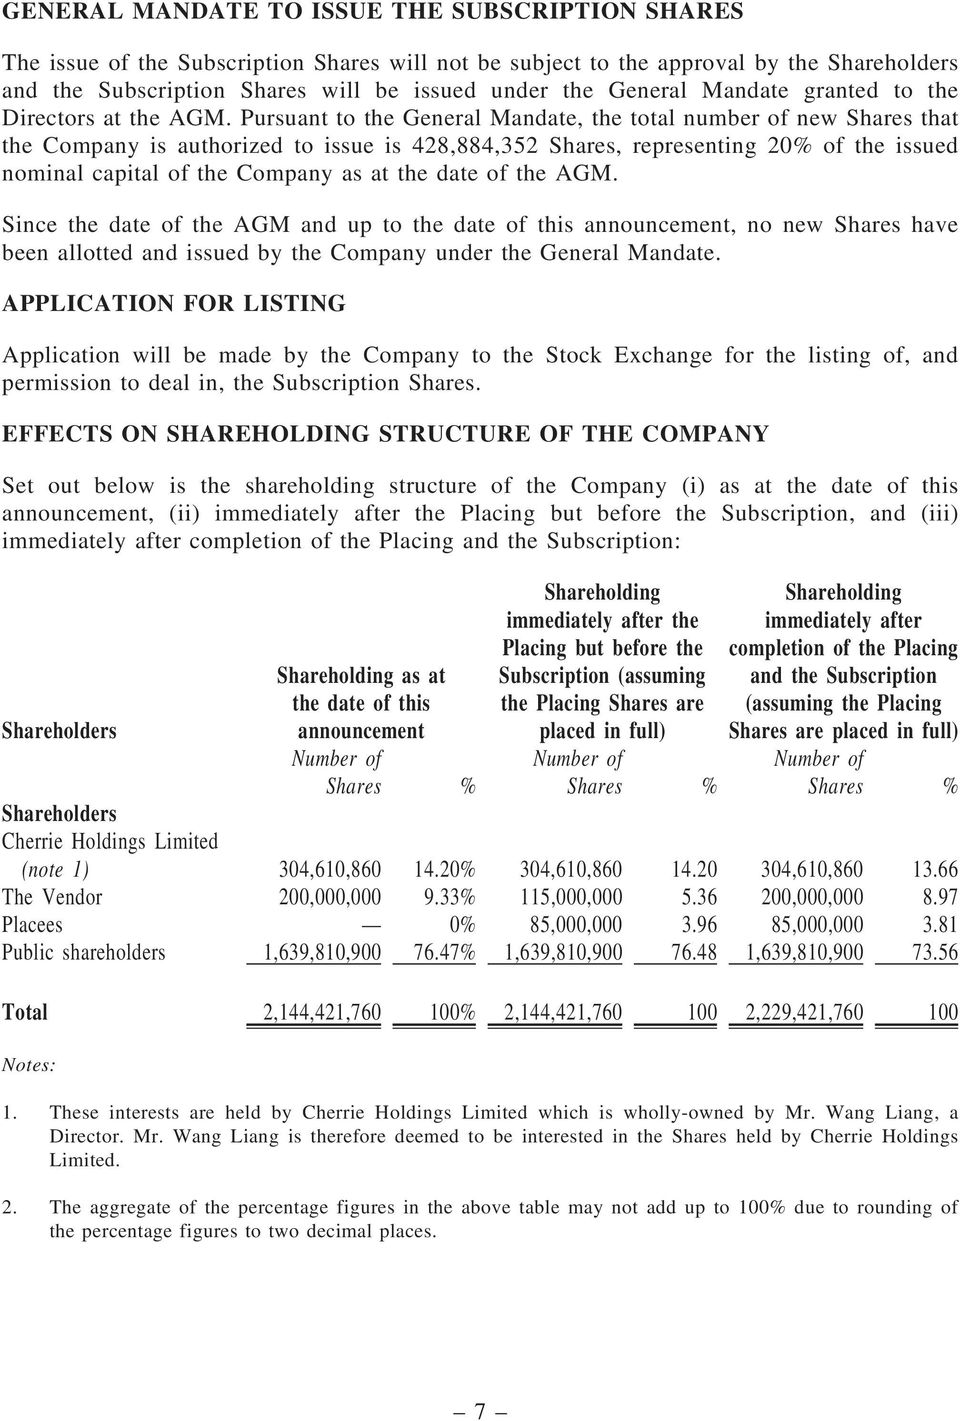 Pursuant to the General Mandate, the total number of new Shares that the Company is authorized to issue is 428,884,352 Shares, representing 20% of the issued nominal capital of the Company as at the